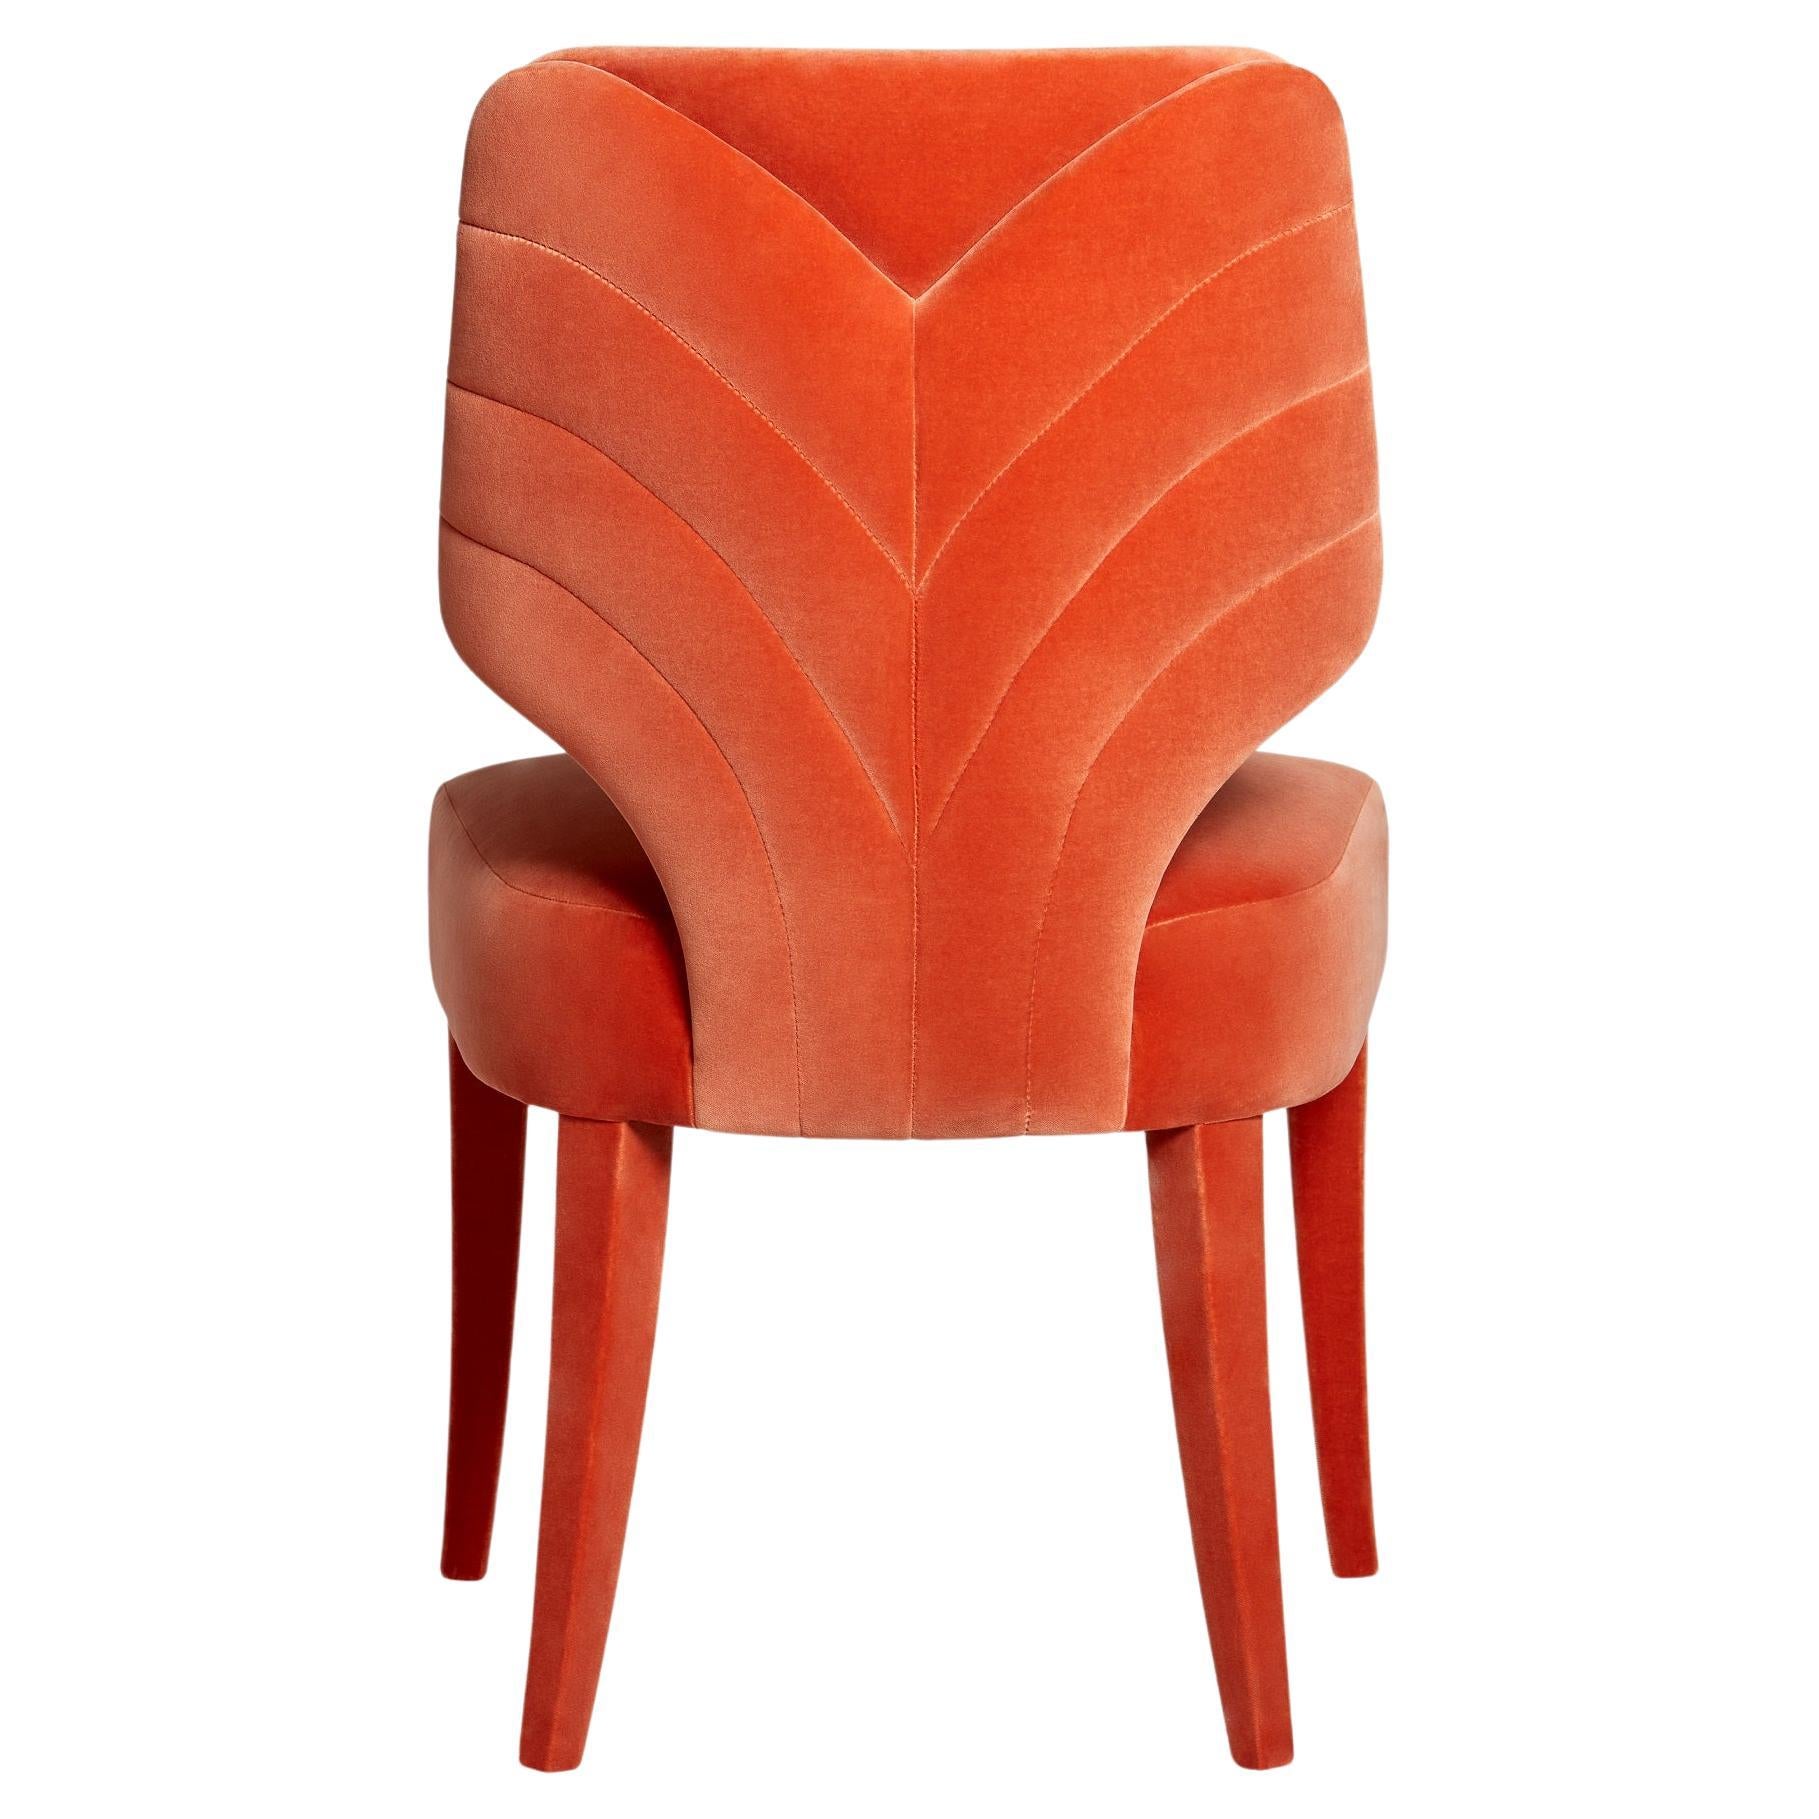 Contemporary Dining Chair with Seaming Details on the Back